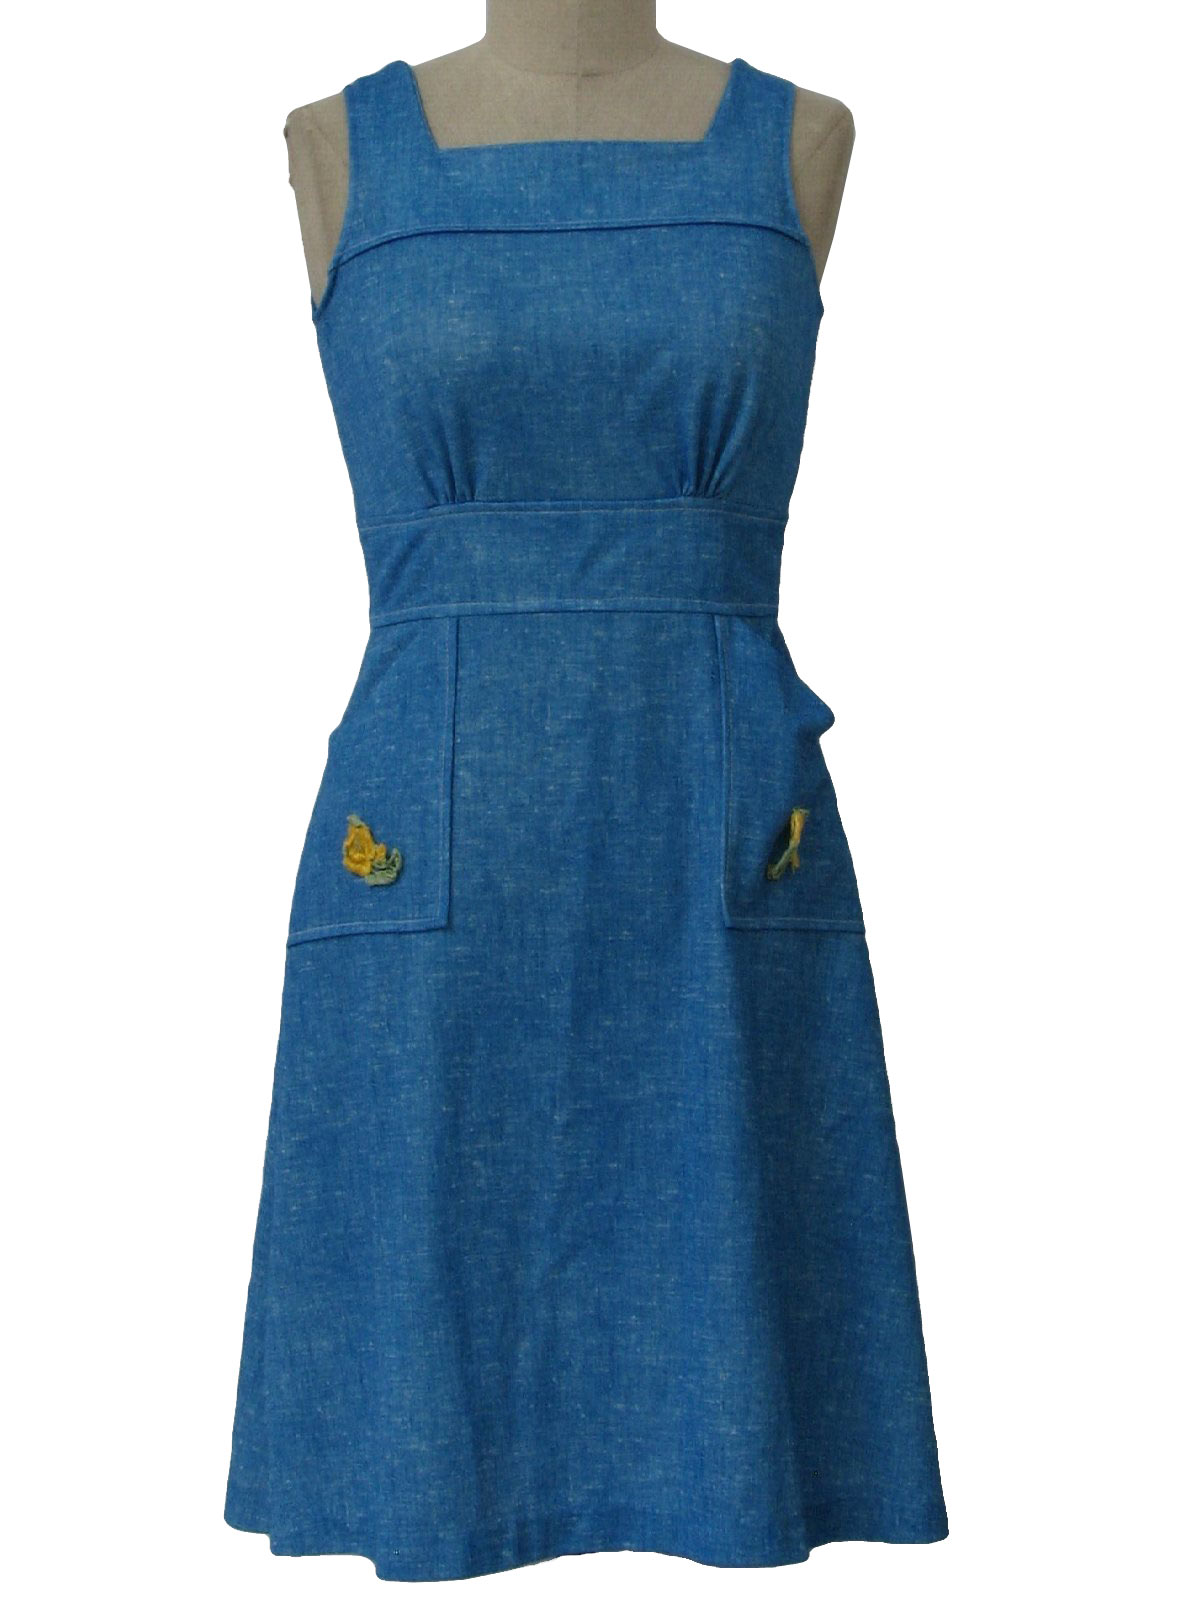 1970 s sears mod knit jumper dress 70s sears womens blended blue and ...